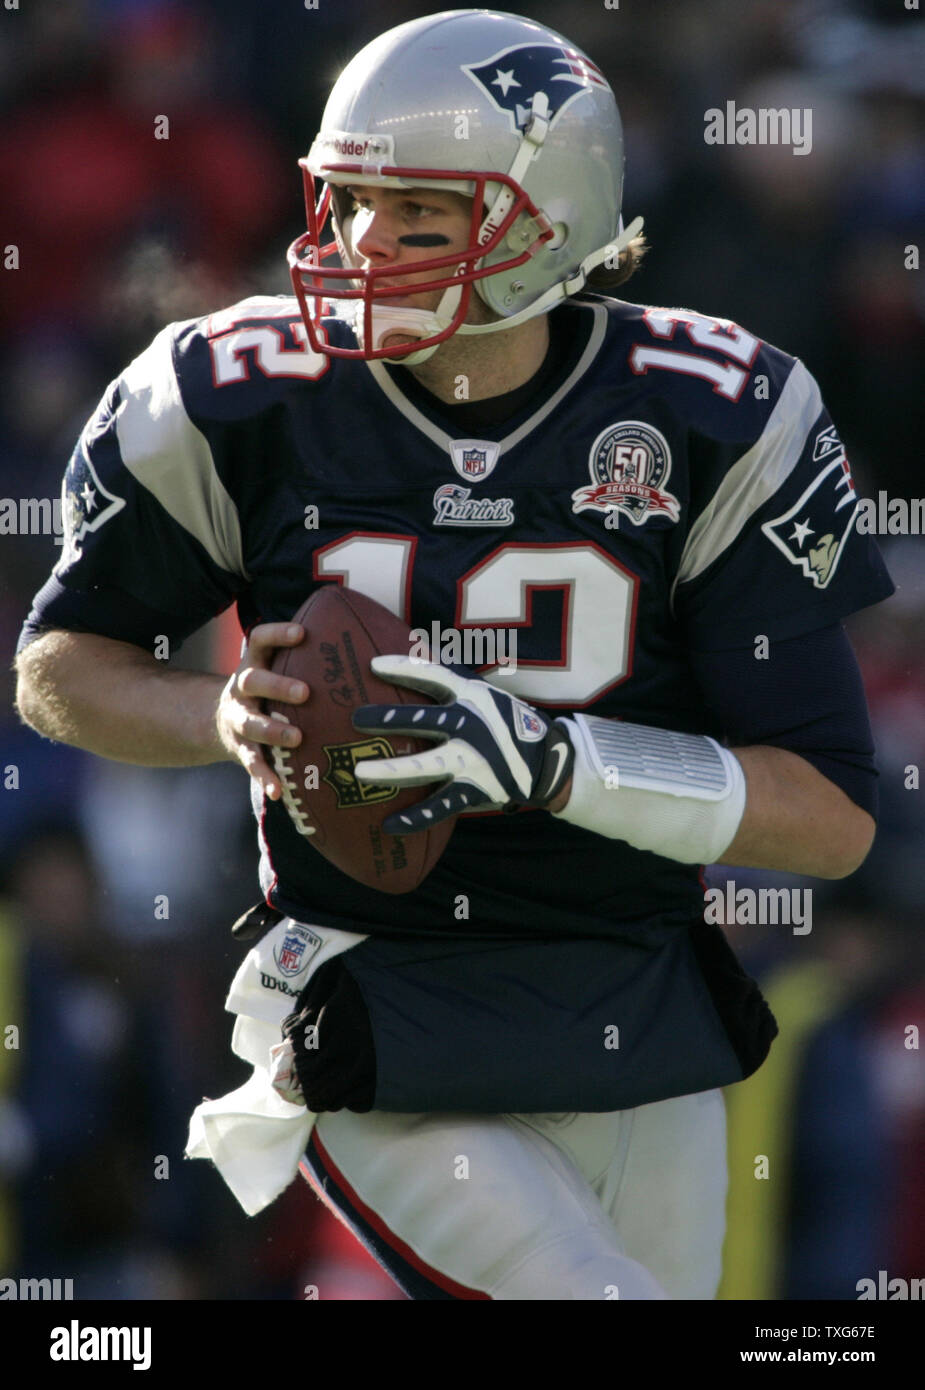 New England Patriots quarterback Tom Brady (12) rolls out for a pass in the first quarter against the Baltimore Ravens at Gillette Stadium in Foxboro, Massachusetts on January 10, 2010.  The Ravens defeated the Patriots 33-14.   UPI/Matthew Healey Stock Photo